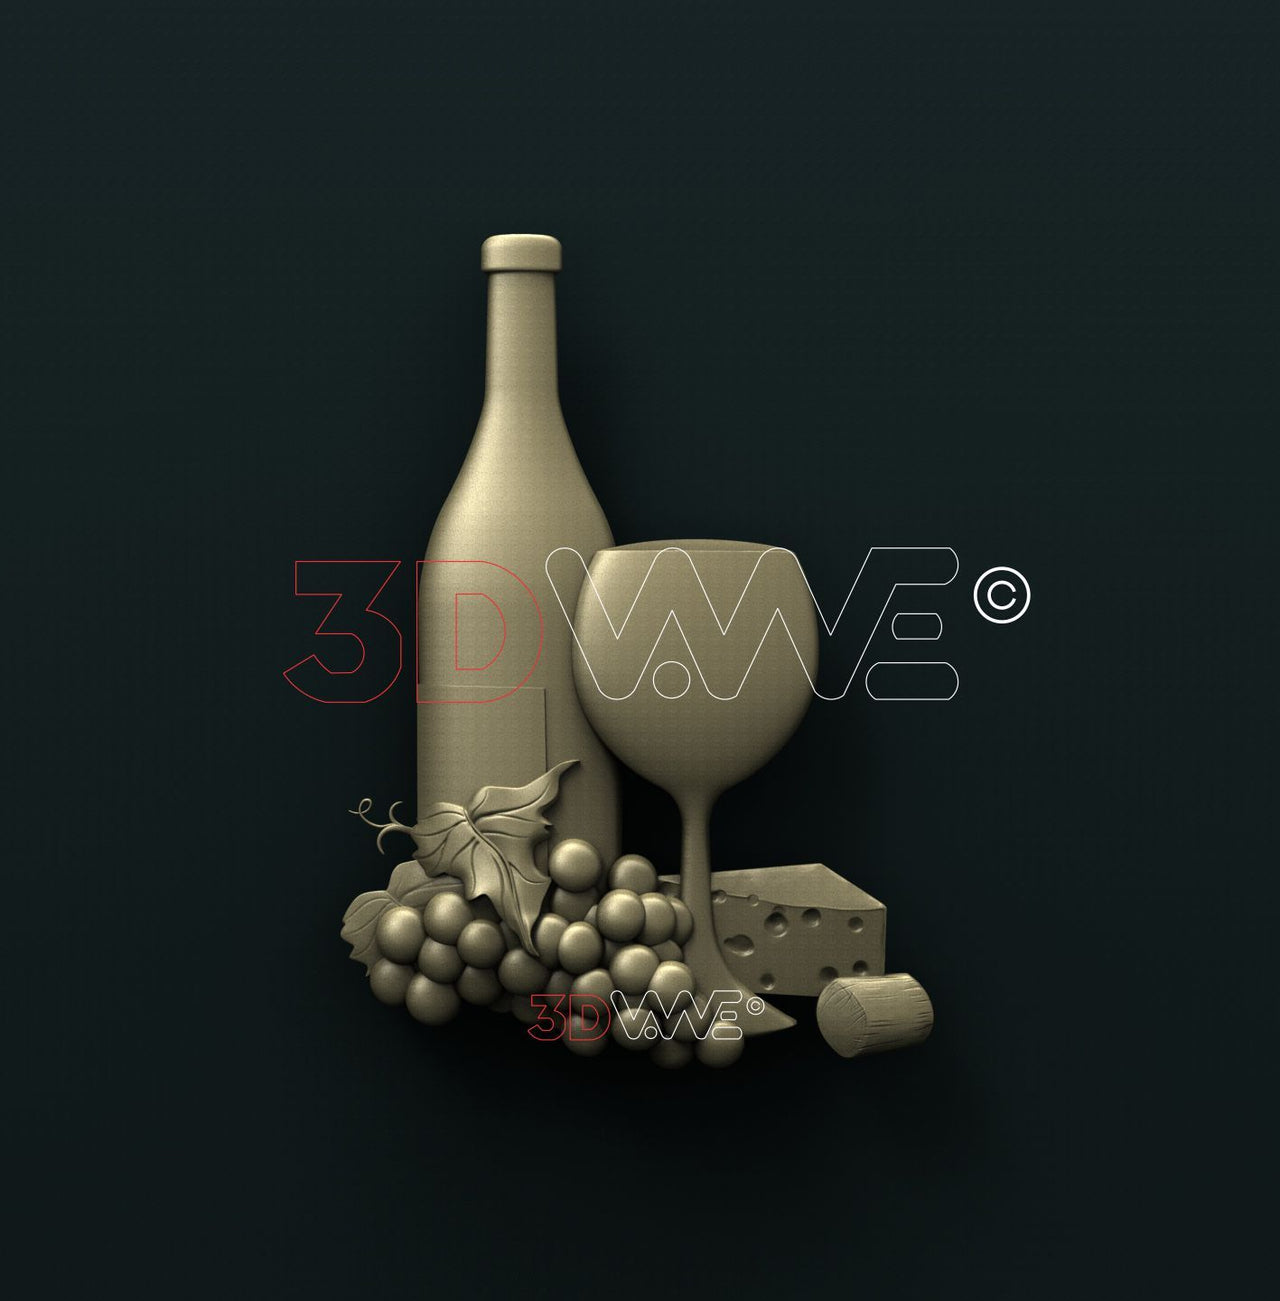 STILL LIFE WITH GRAPE AND WINE 3D STL 3DWave